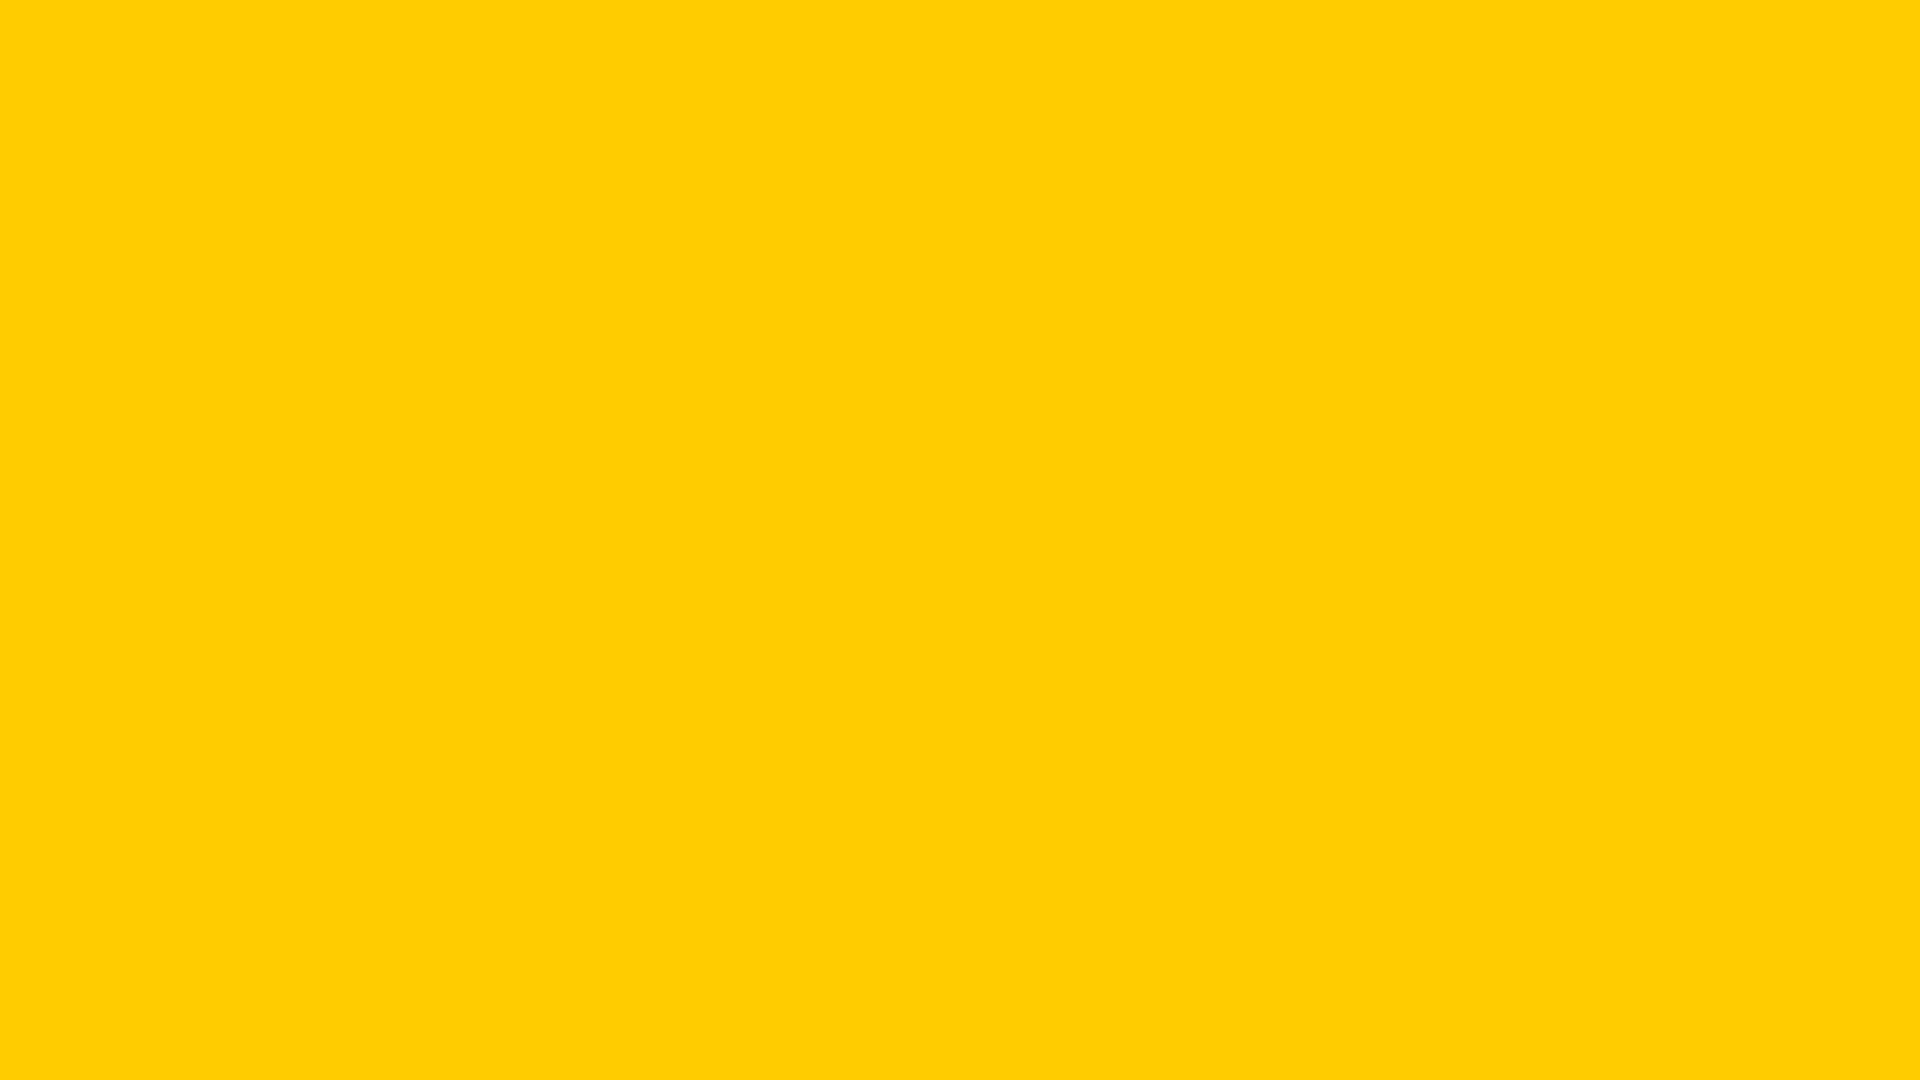 1920x1080 tangerine yellow solid color background